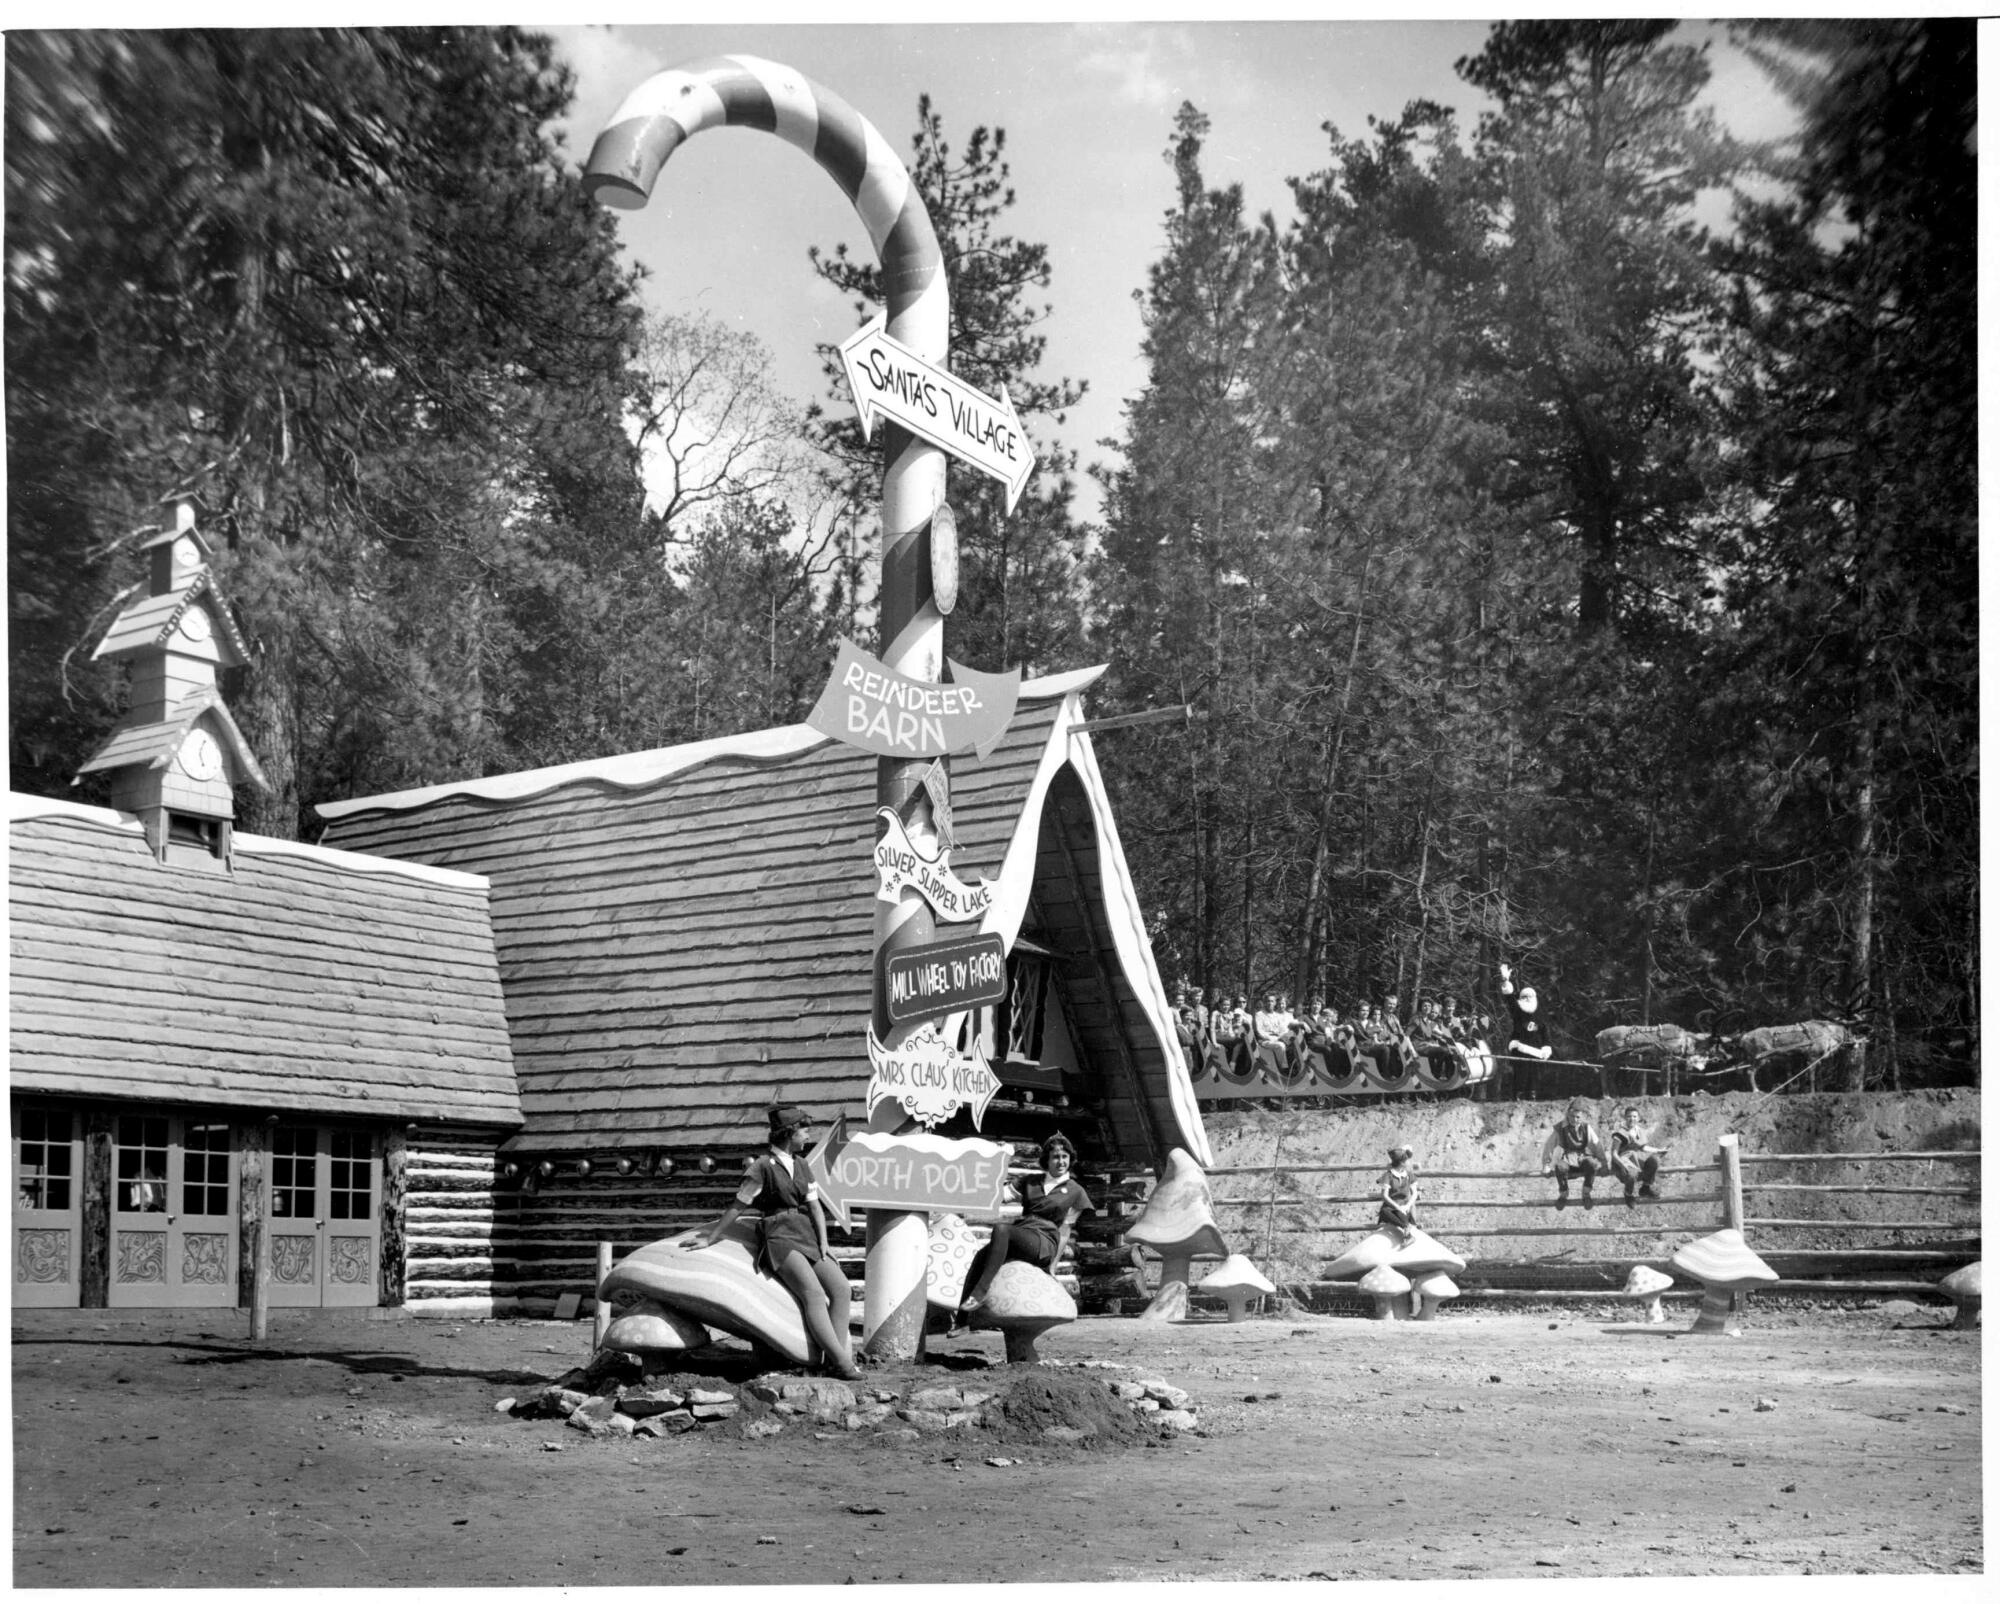 A candy cane cottage greets guests at Santa's Village in this undated photo.